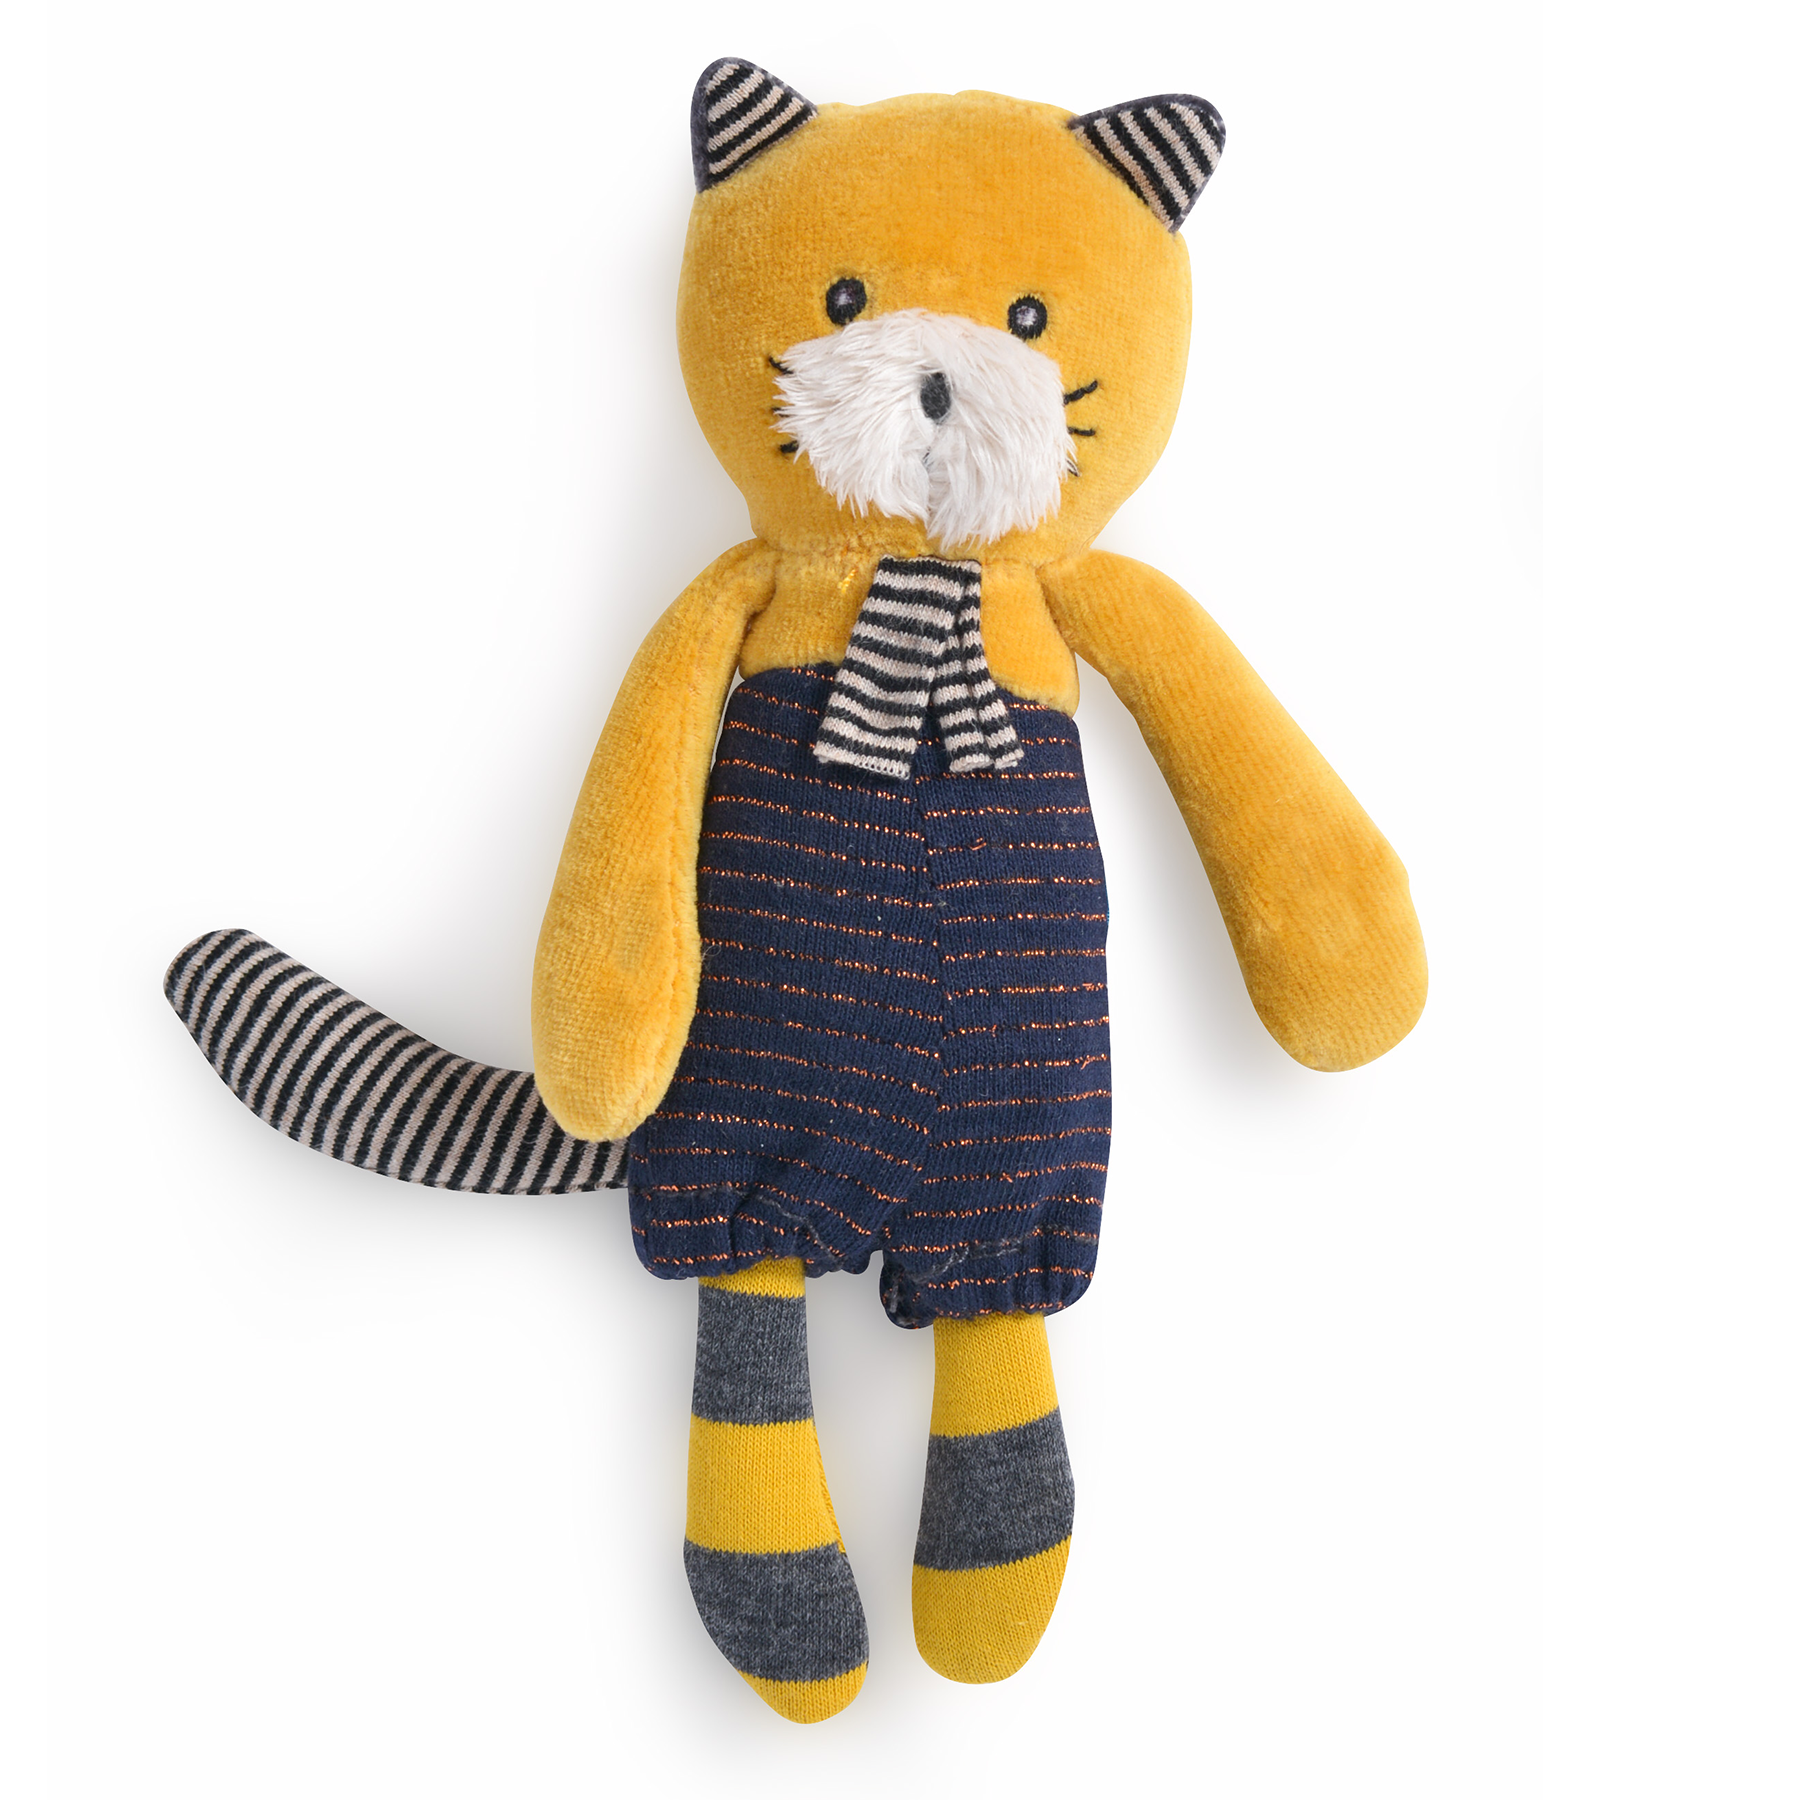 Meet Petite Lulu! Part of the Moustaches family, perfect for a snuggle. These small cute cats are safe for newborns.